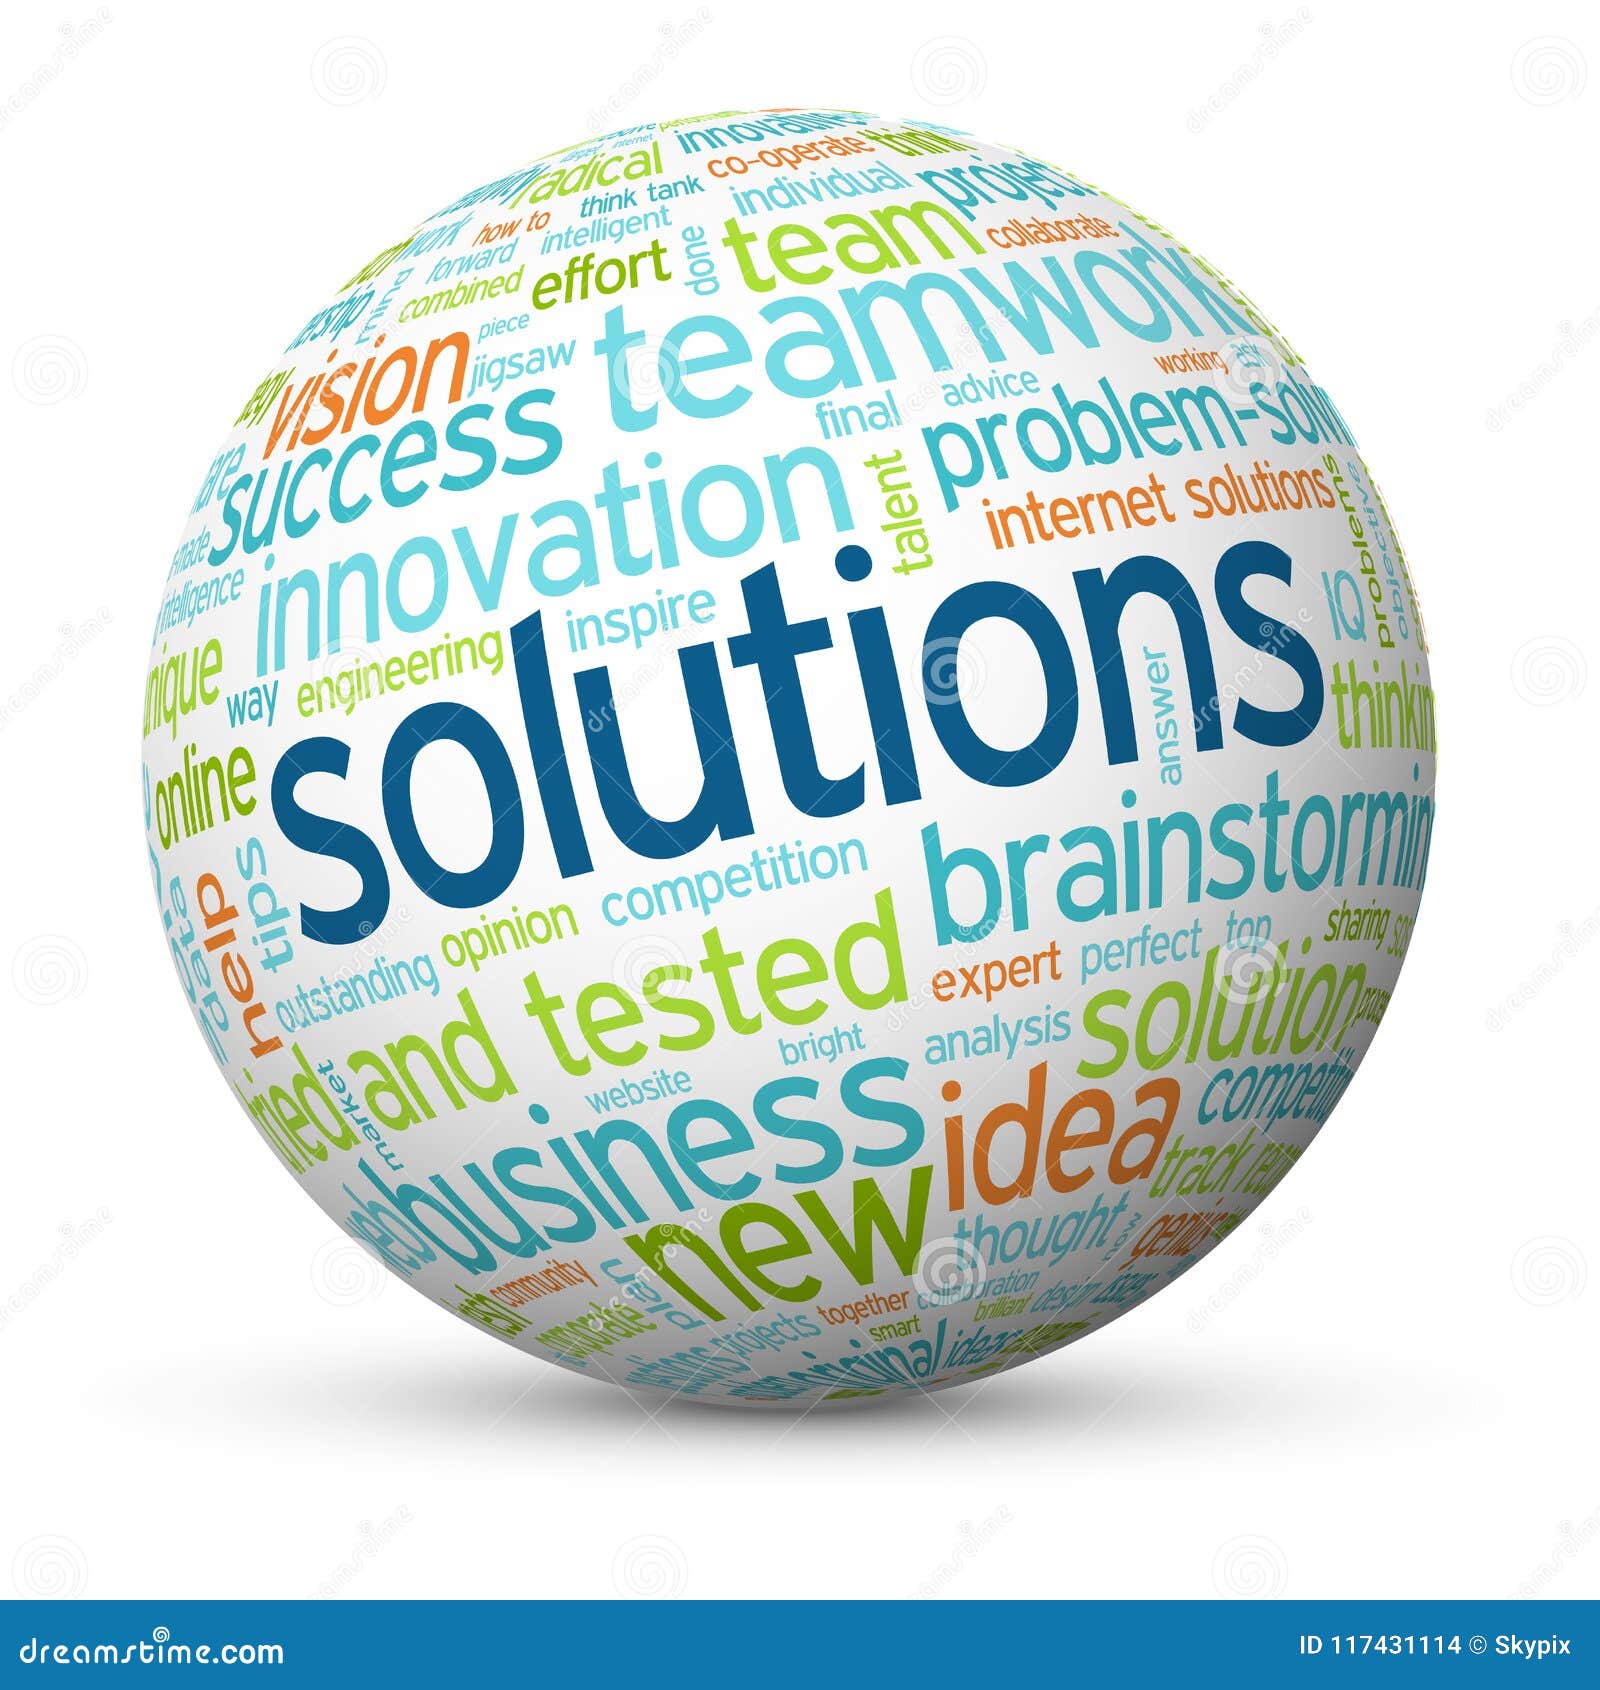 solutions tag cloud mapped onto a sphere